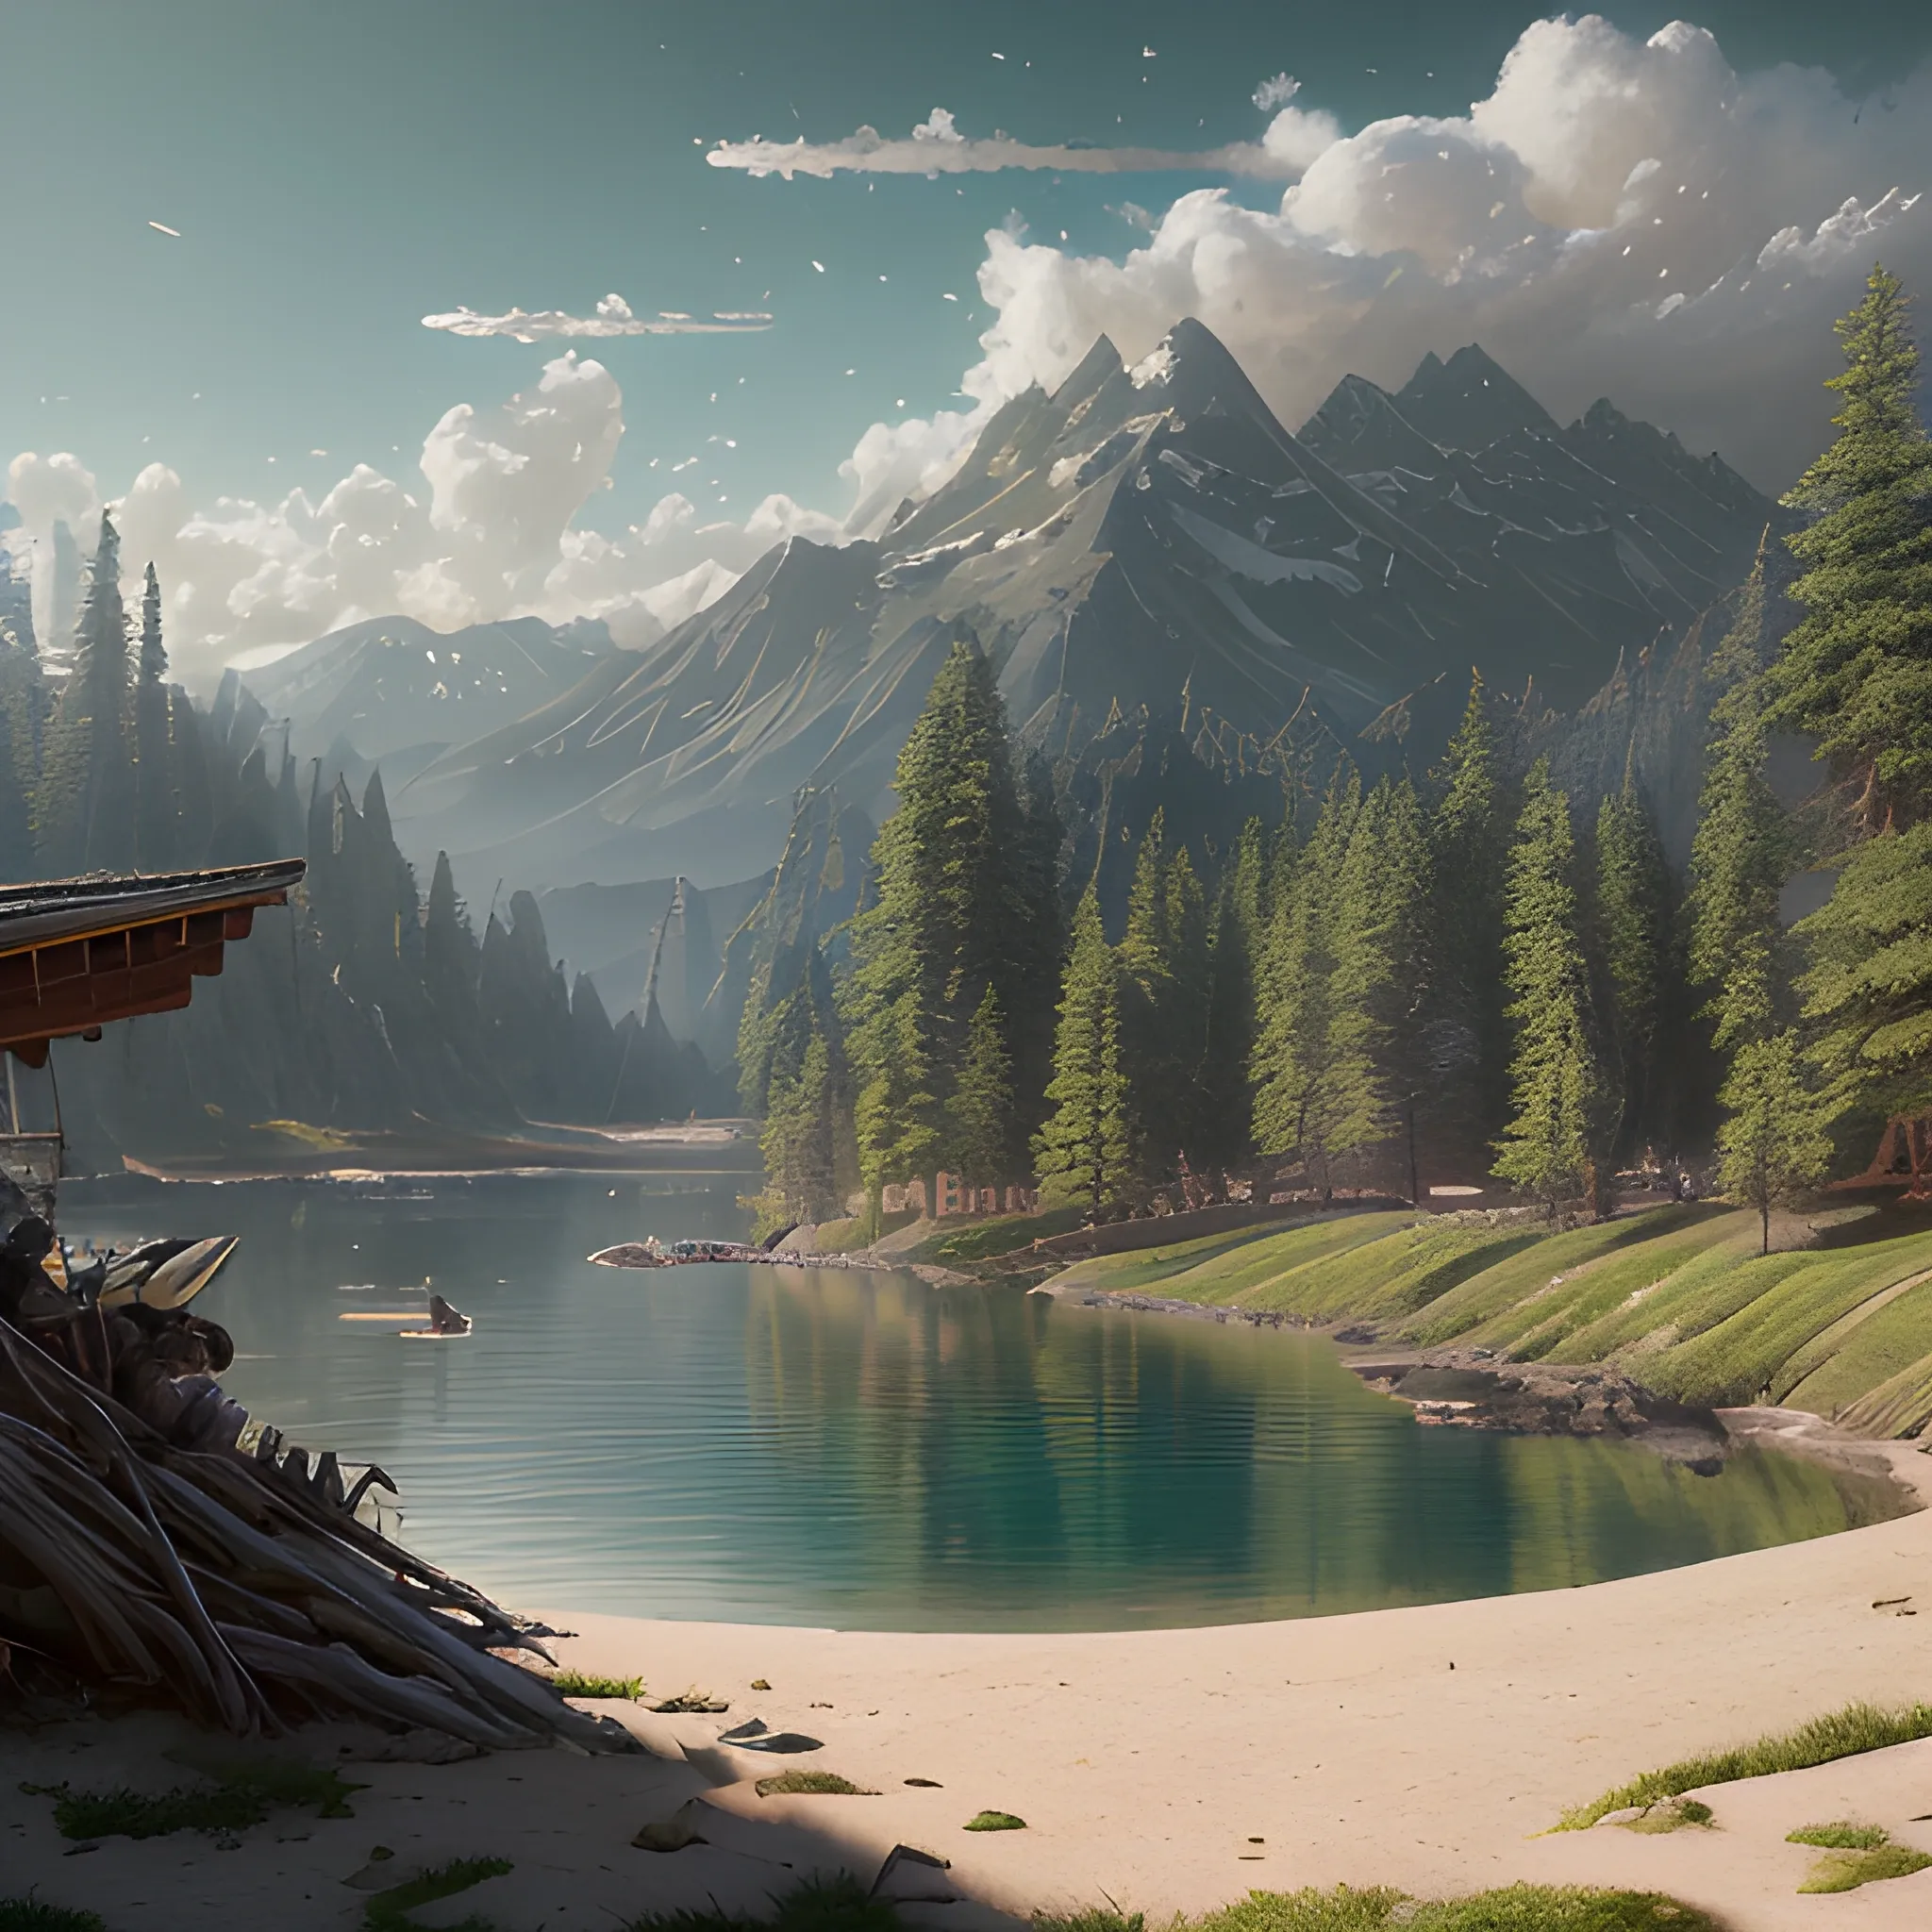 festival, hyper realistic, epic composition, cinematic, landscape vista photography by Carr Clifton & Galen Rowell, Landscape veduta photo by Dustin Lefevre & tdraw, detailed landscape painting by Ivan Shishkin, rendered in Enscape, Miyazaki, Nausicaa Ghibli, 4k detailed post processing, unreal engine